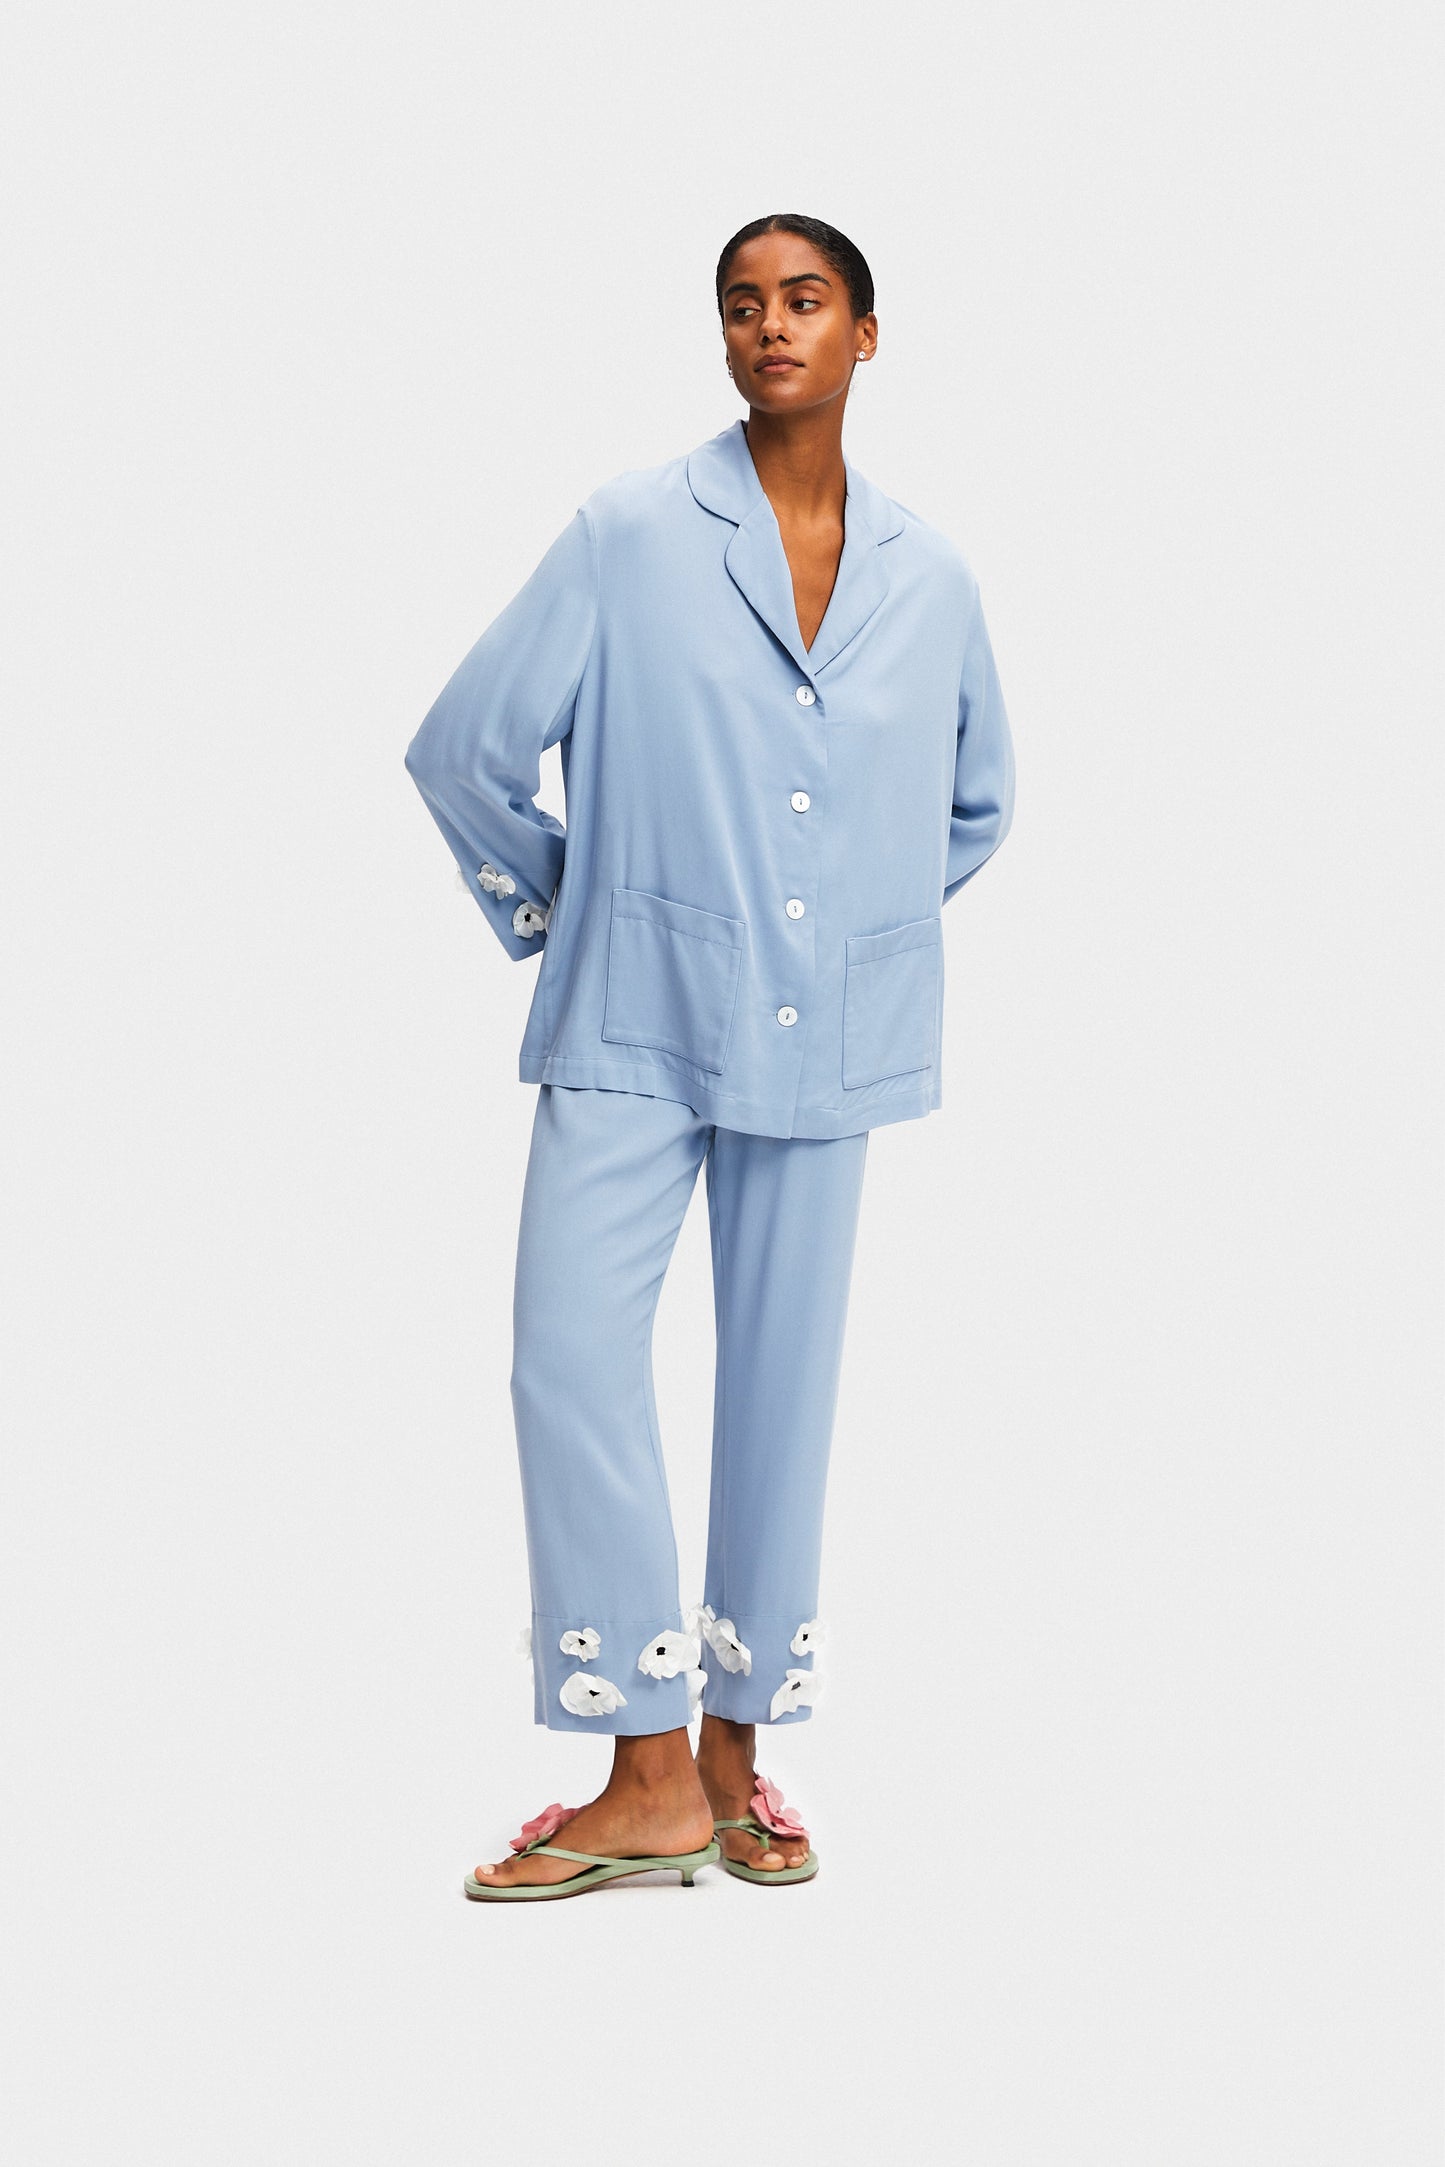 The Bloom Party Pajama Set with Pants in Blue